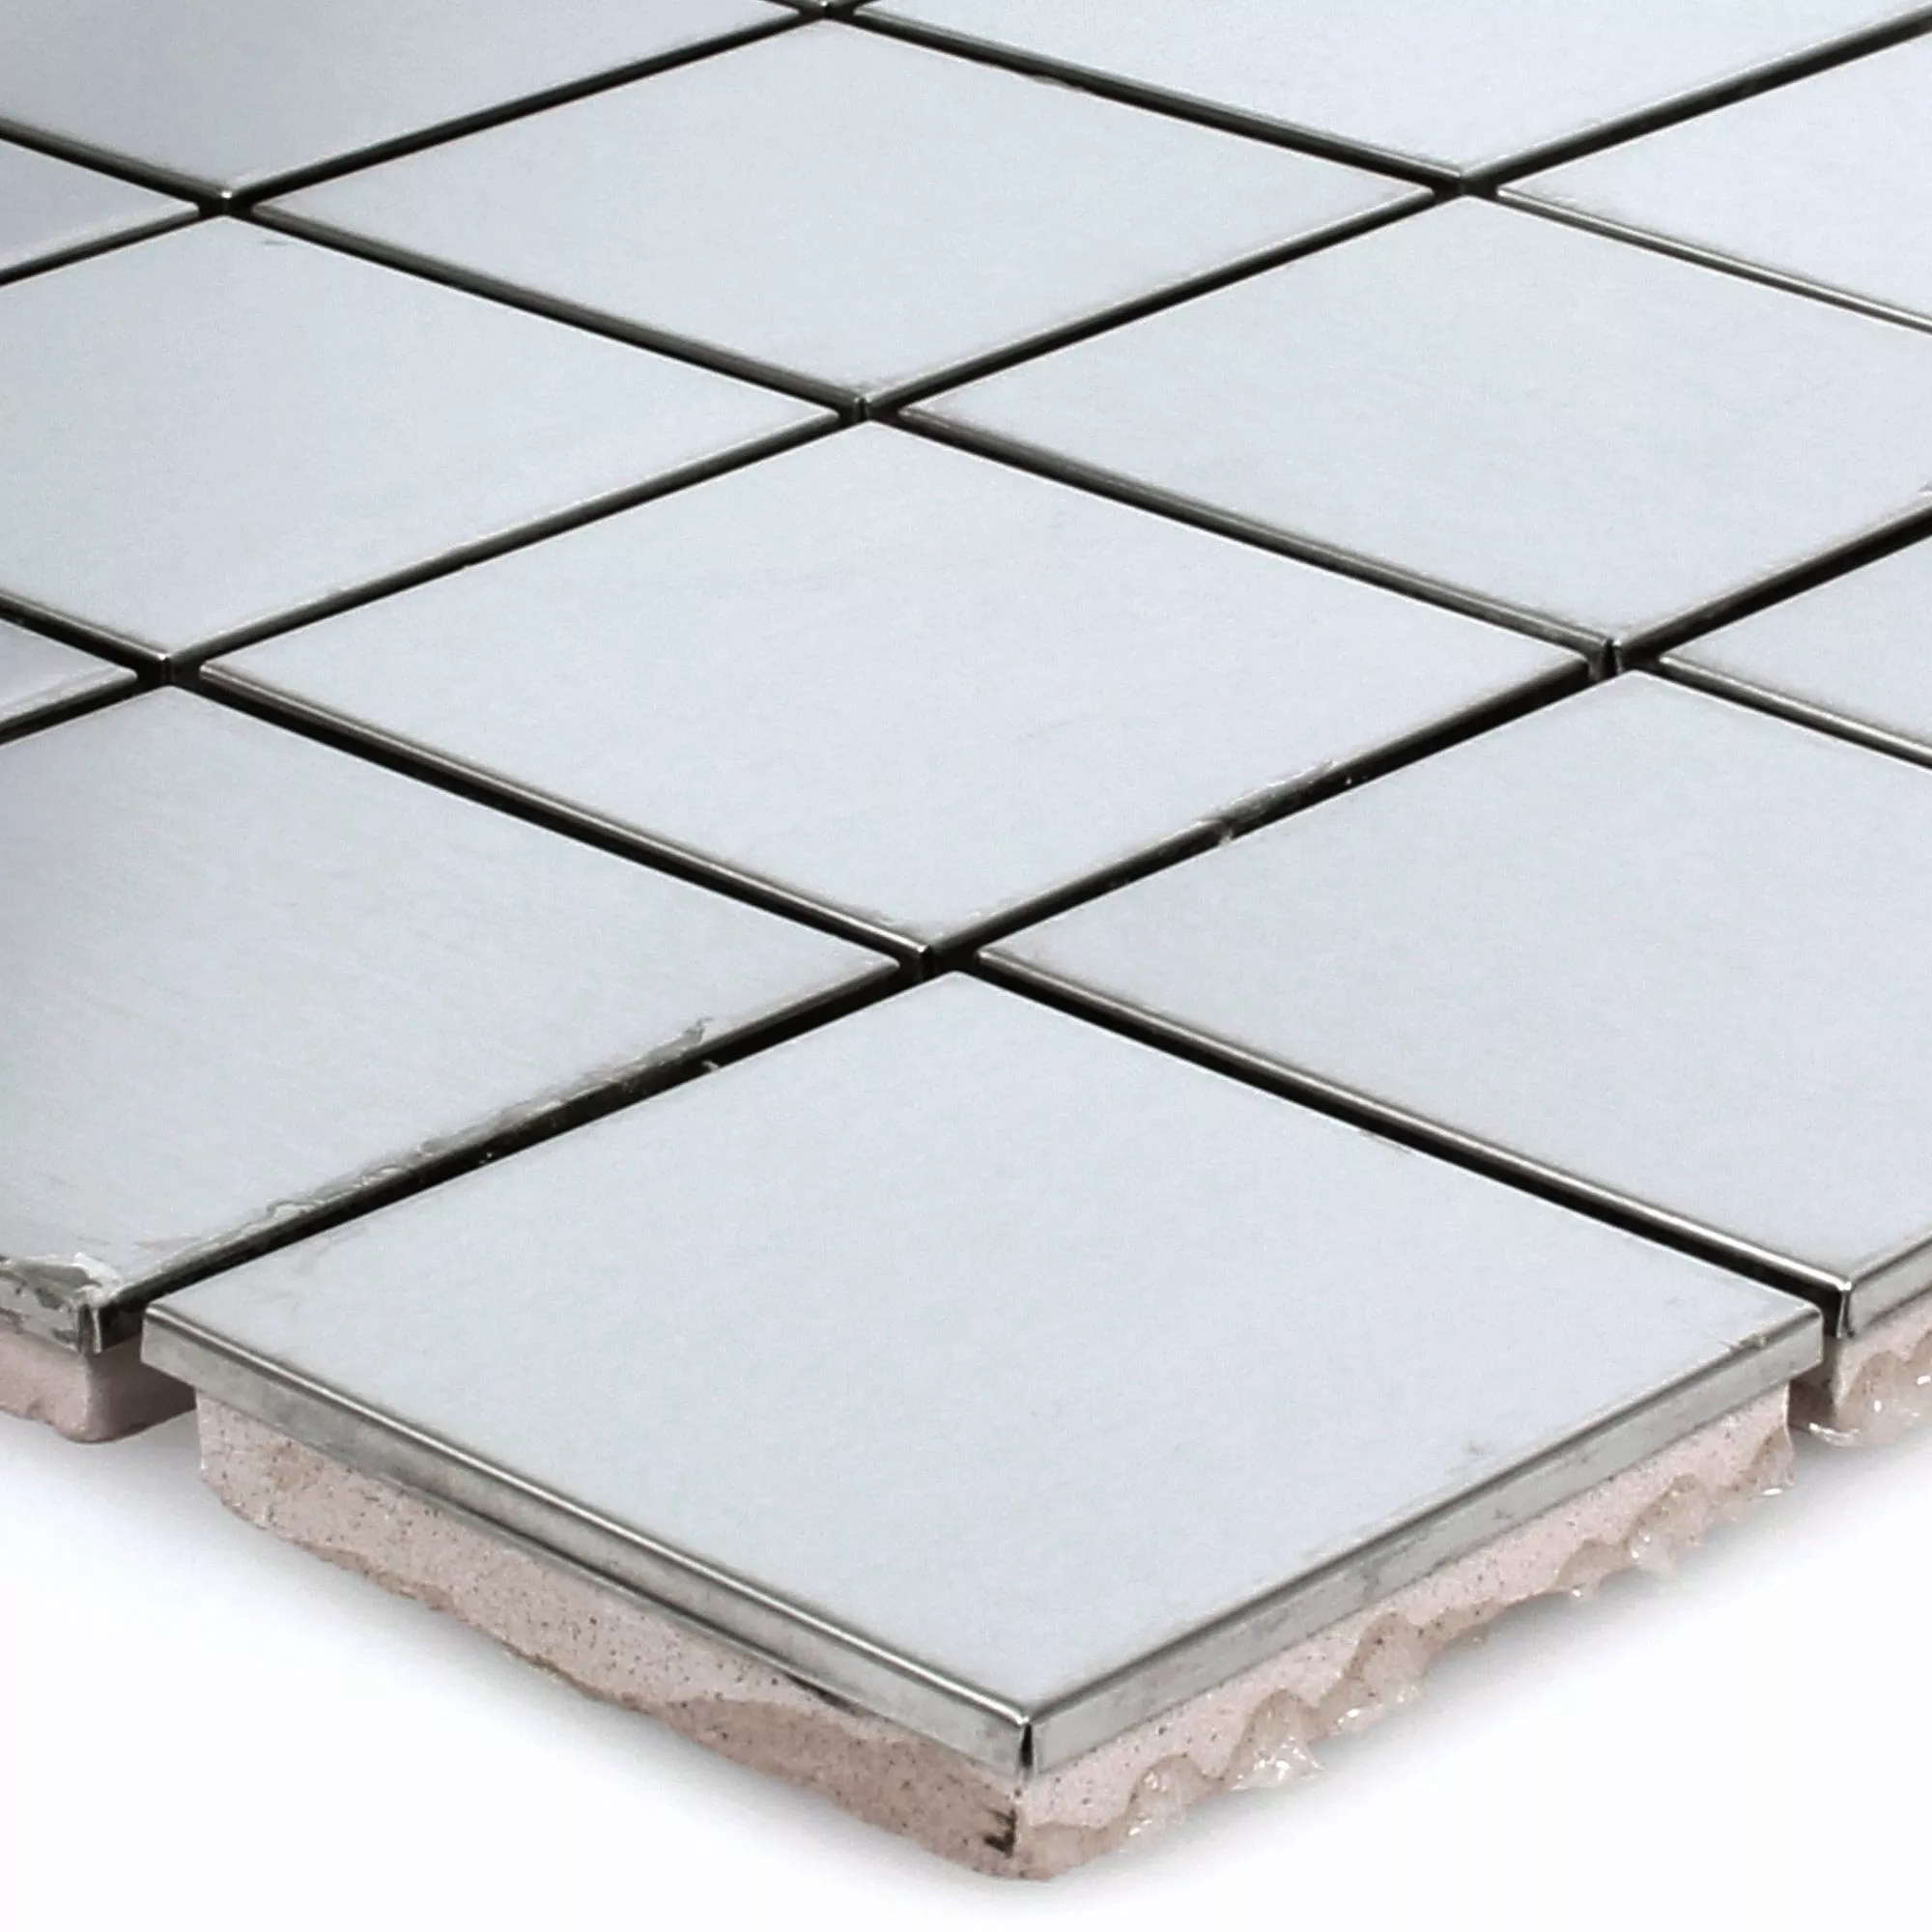 Stainless Steel Mosaic Tiles Glossy Square 48